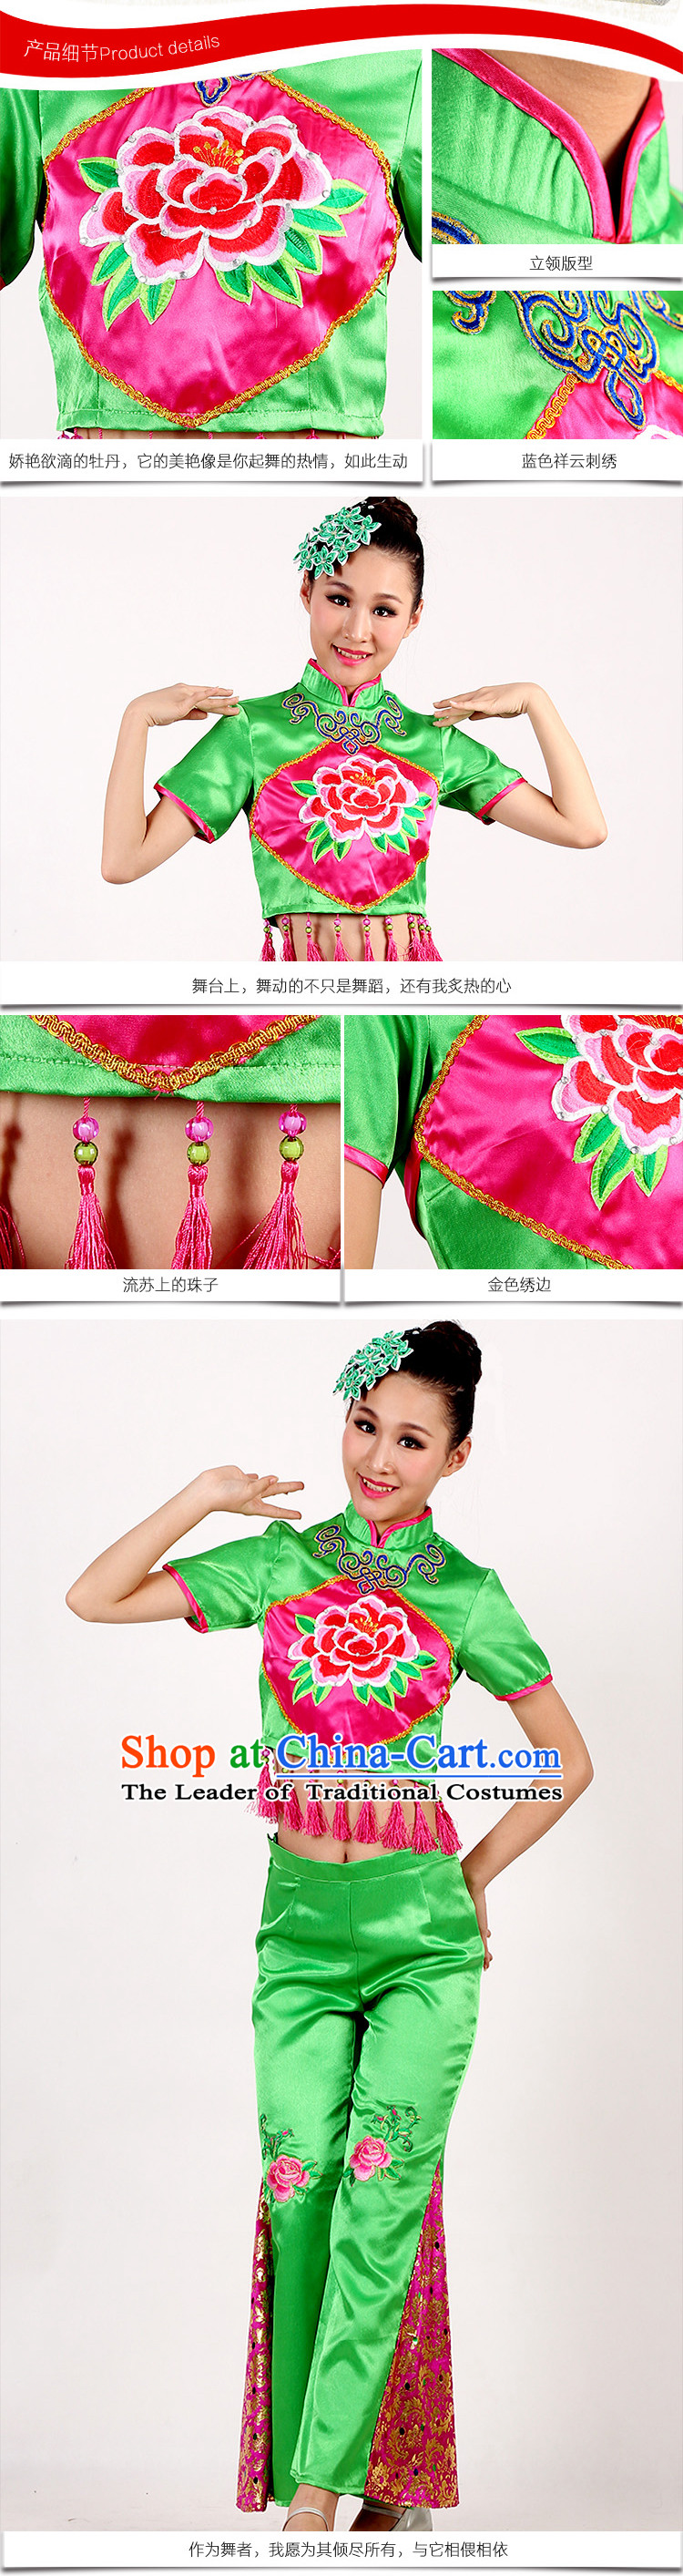 Asia Chinese Festival Parade Fan Dance Costume and Headpiece for Women